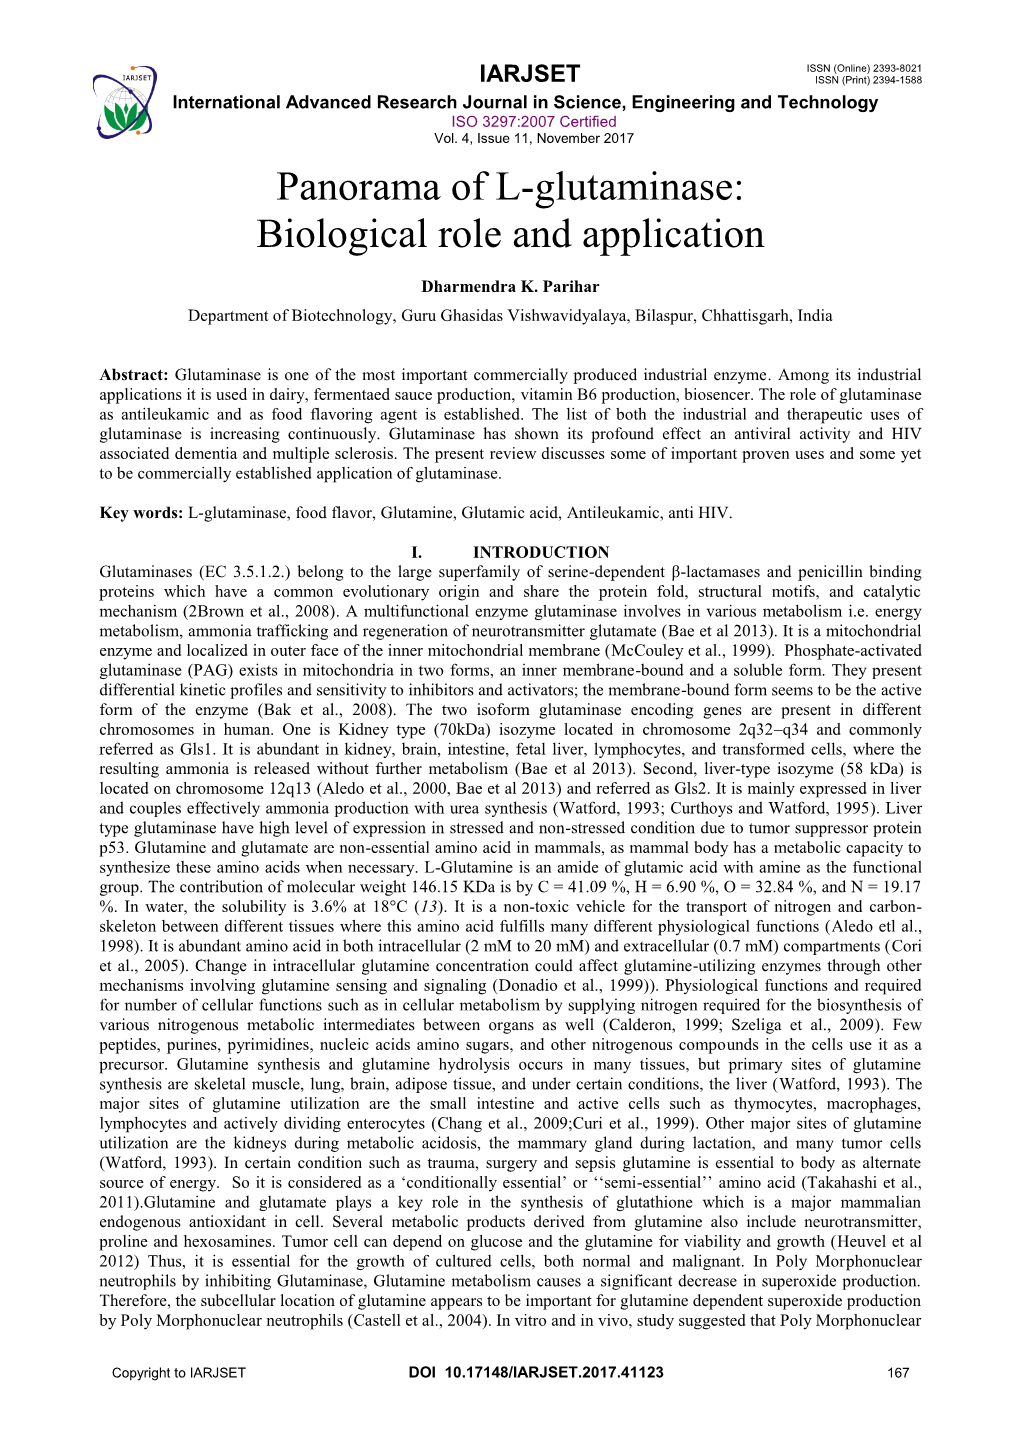 Panorama of L-Glutaminase: Biological Role and Application